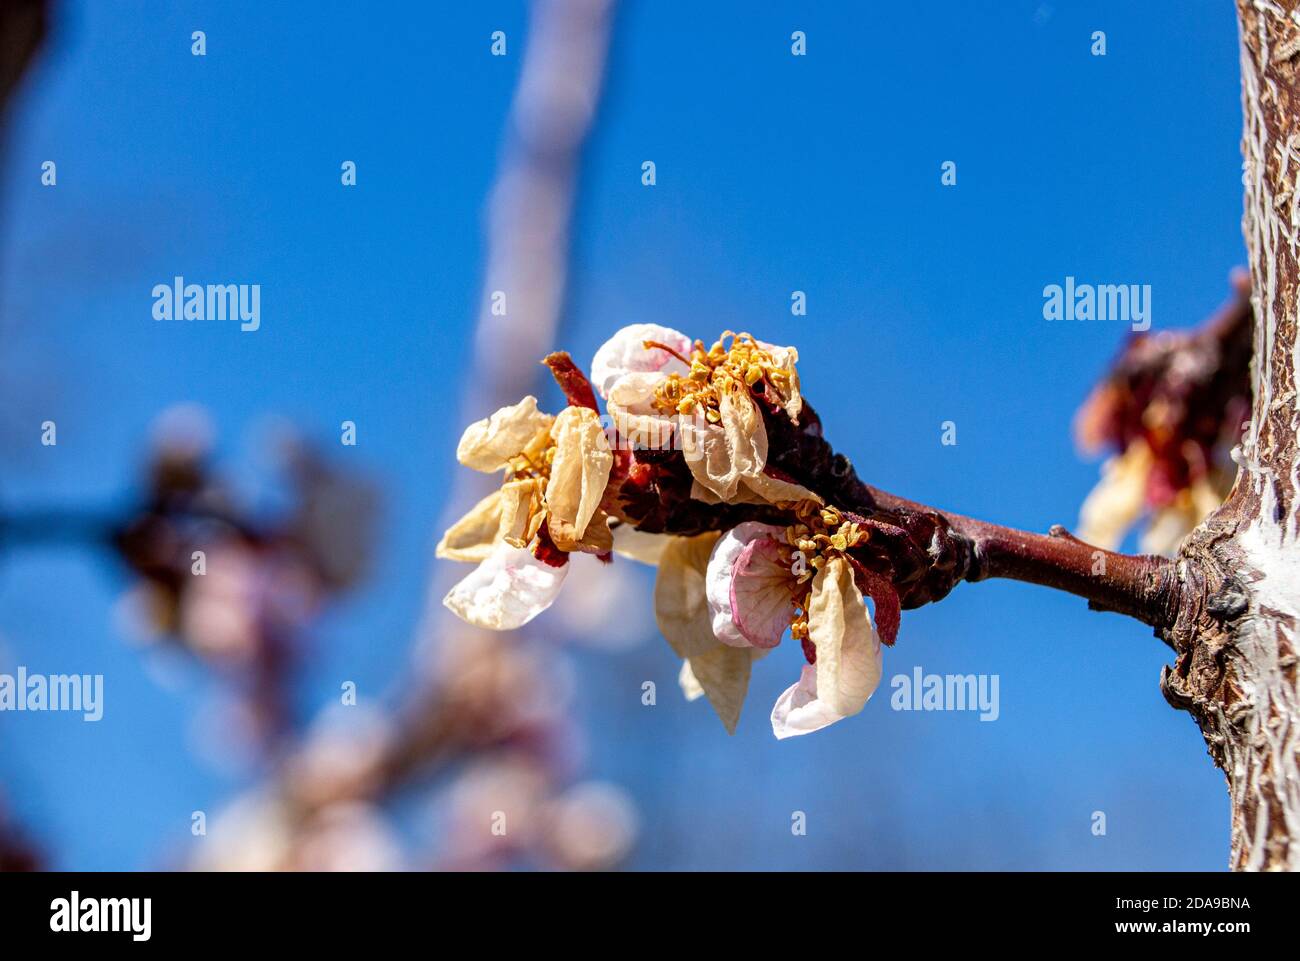 Damaged inflorescence of fruit trees apricot frosts. Decrease in fruit yield due to inclement weather in spring. Stock Photo